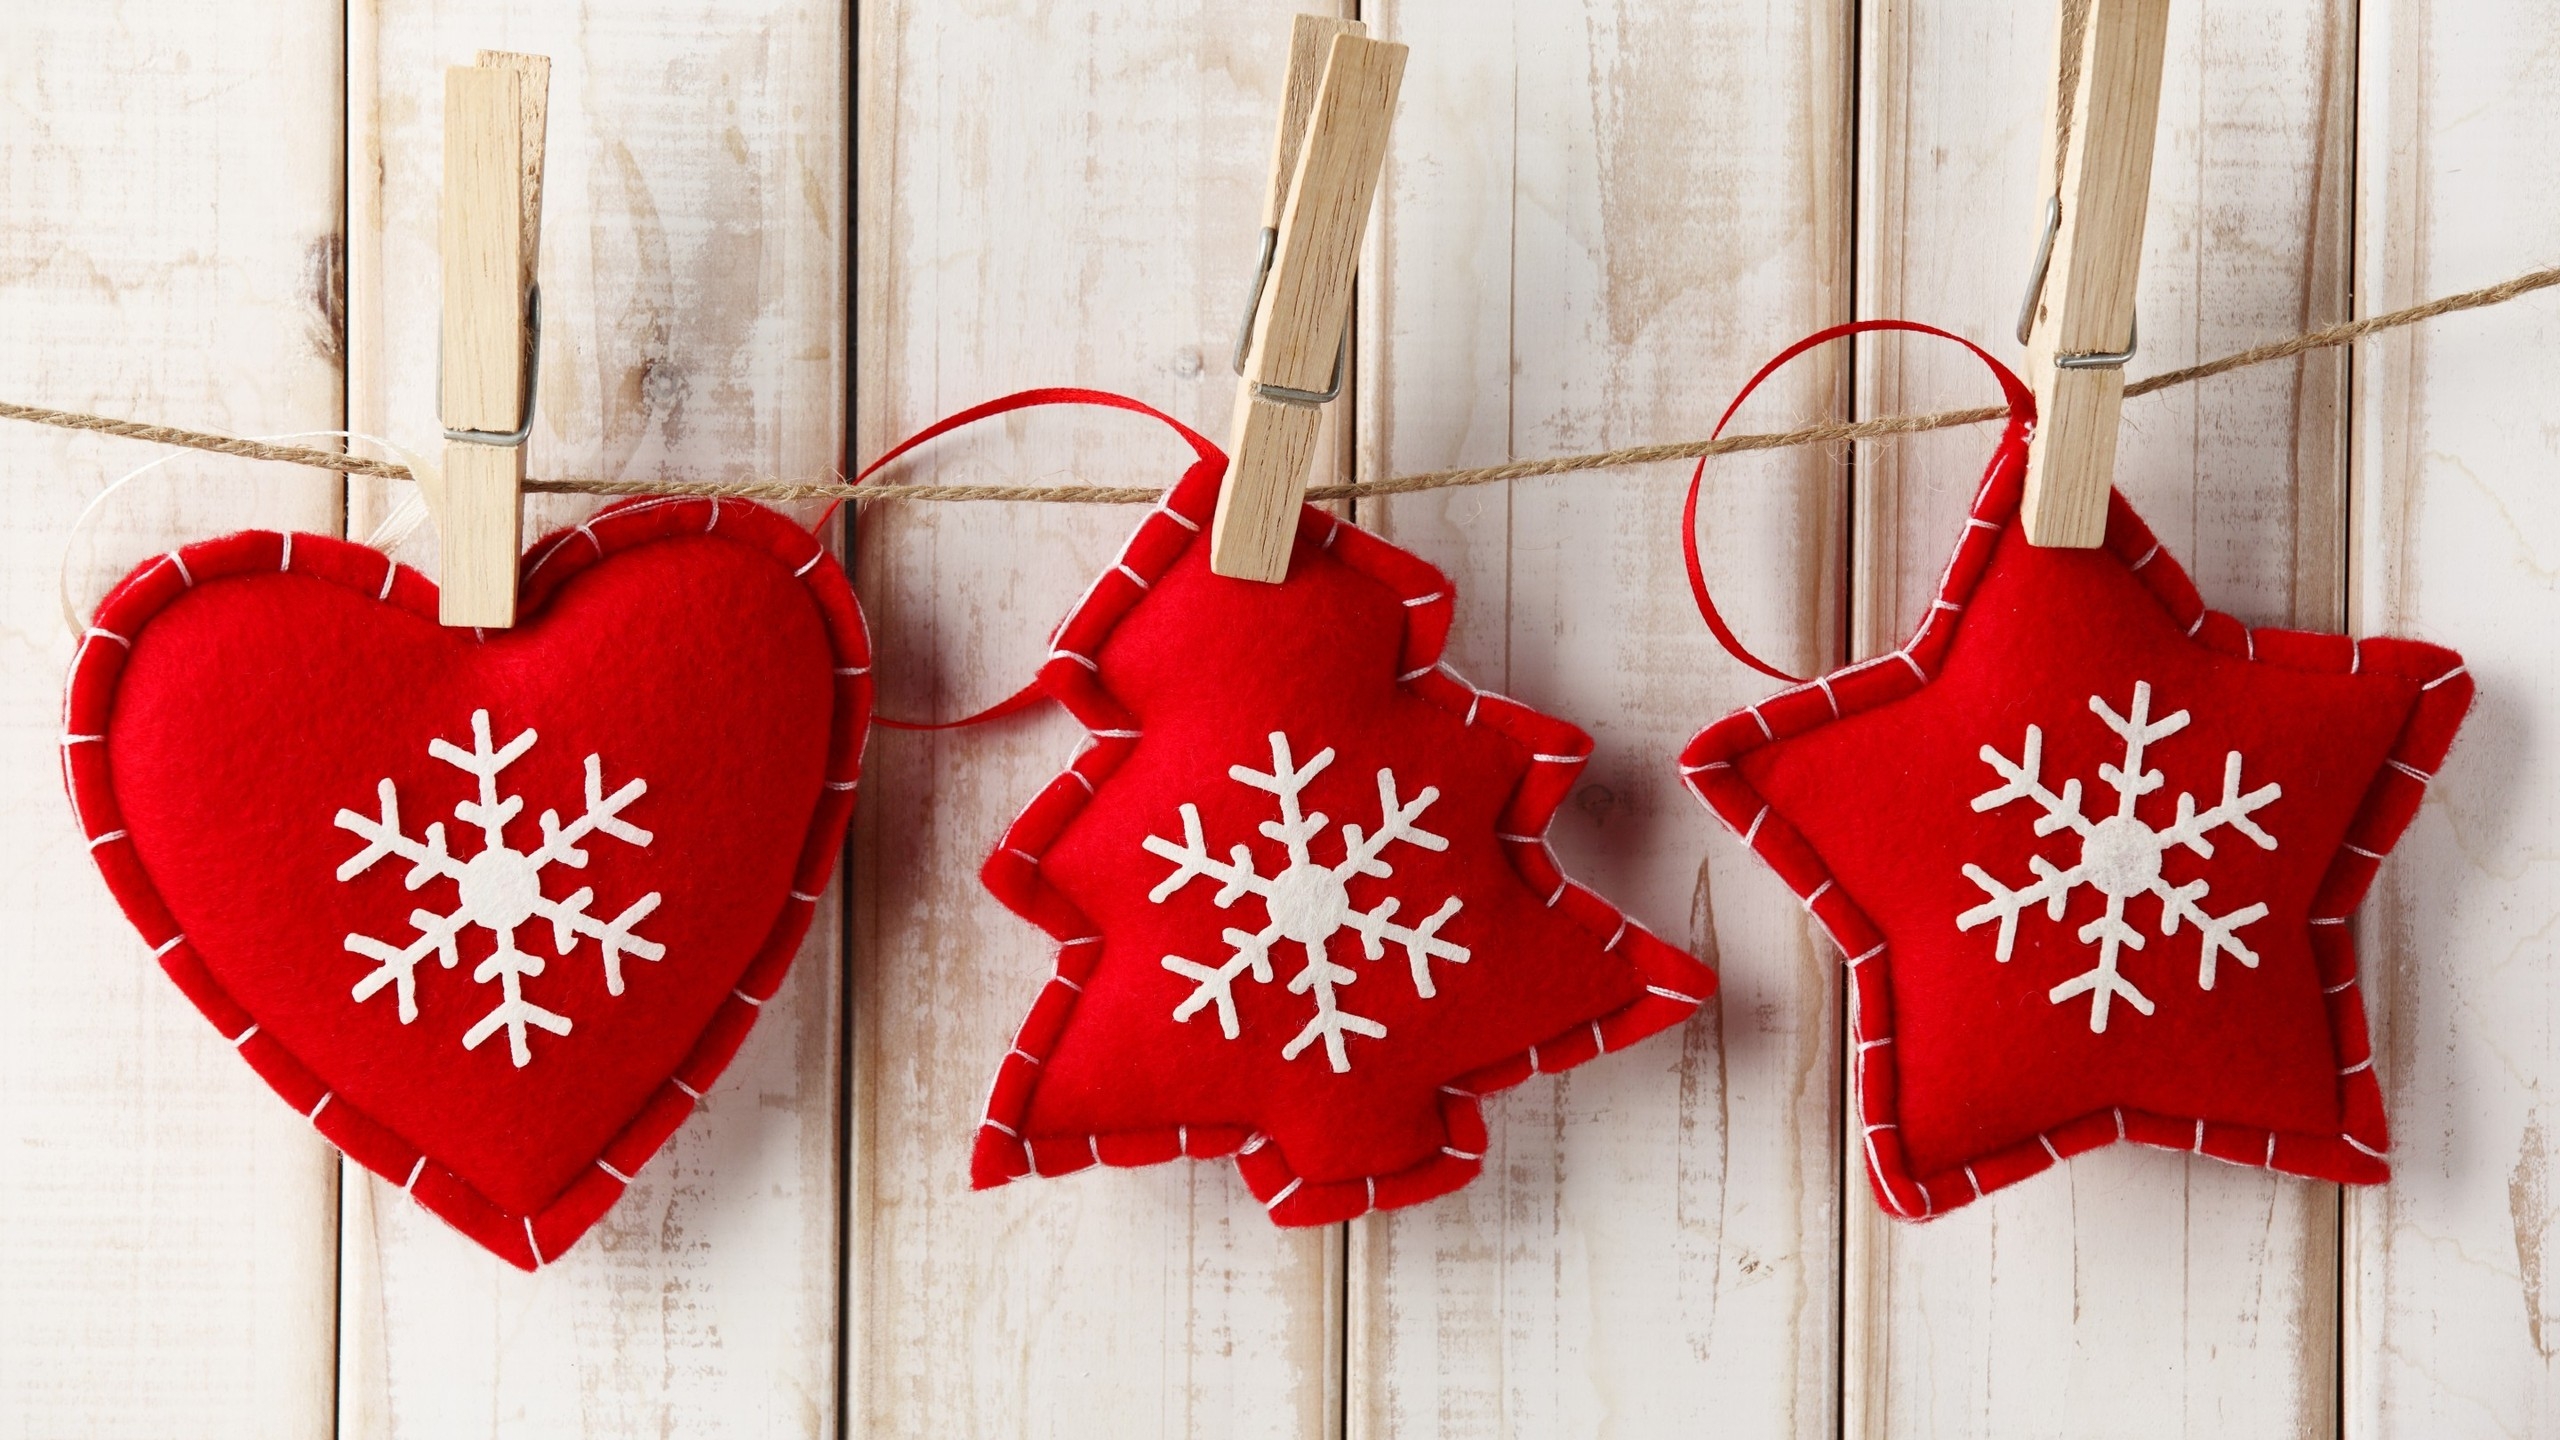 Handmade Red Christmas Ornaments for 2560x1440 HDTV resolution